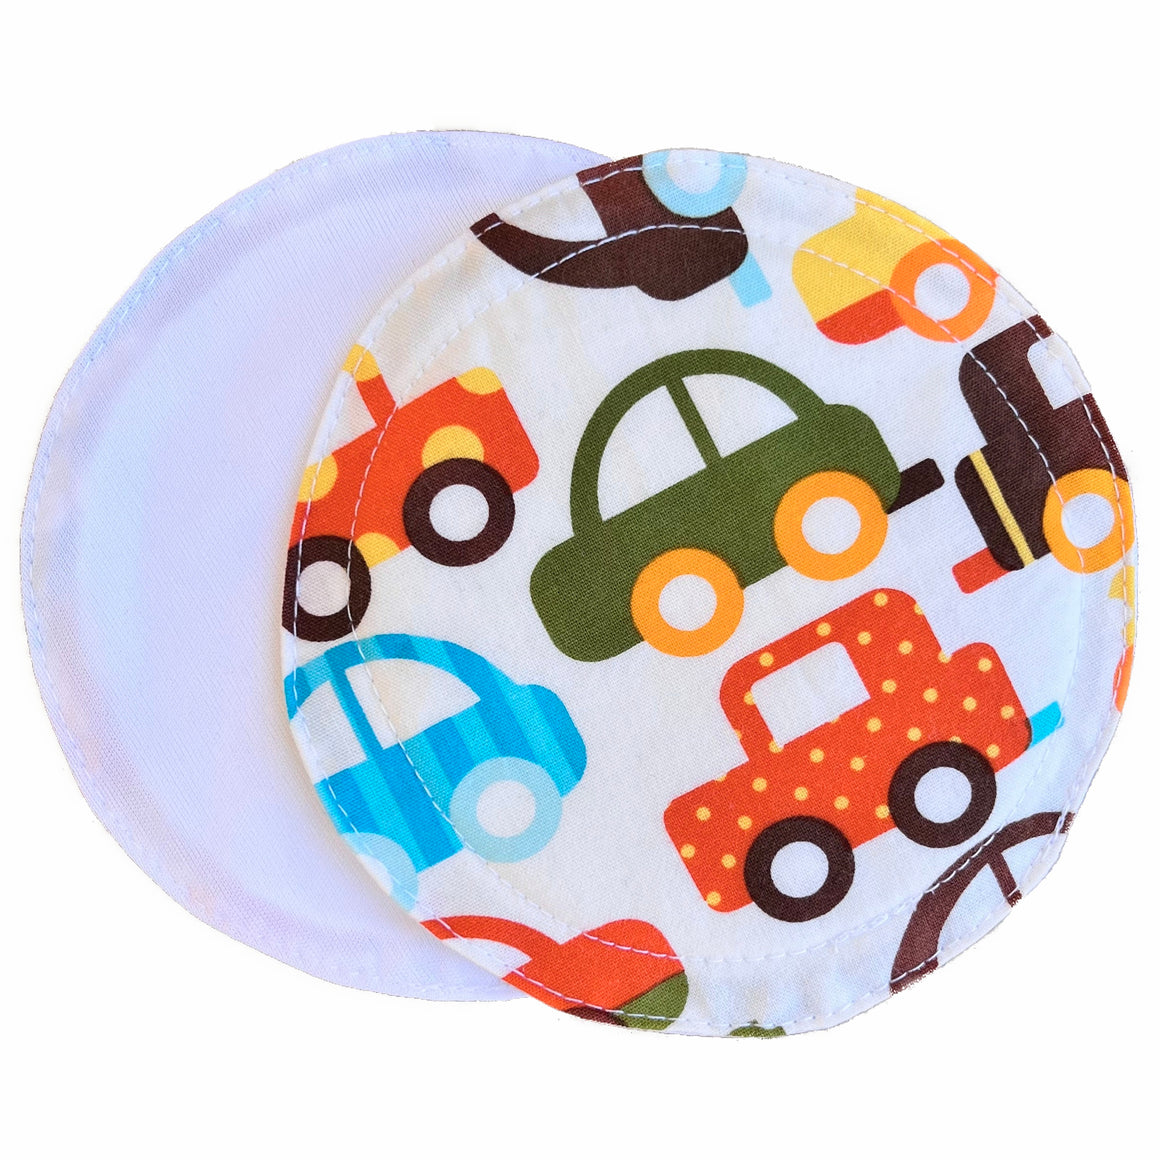 Scarlet Eve Organic Cars Breast Pads. Top: organic woven cotton with cute orange, aqua blue, olive green, golden yellow and chocolate brown cartoon cars on a white background. Back: Solid white PUL. 2 layers bamboo fleece sewn in. Scarlet Eve breast pads have generous coverage and superior absorbency.